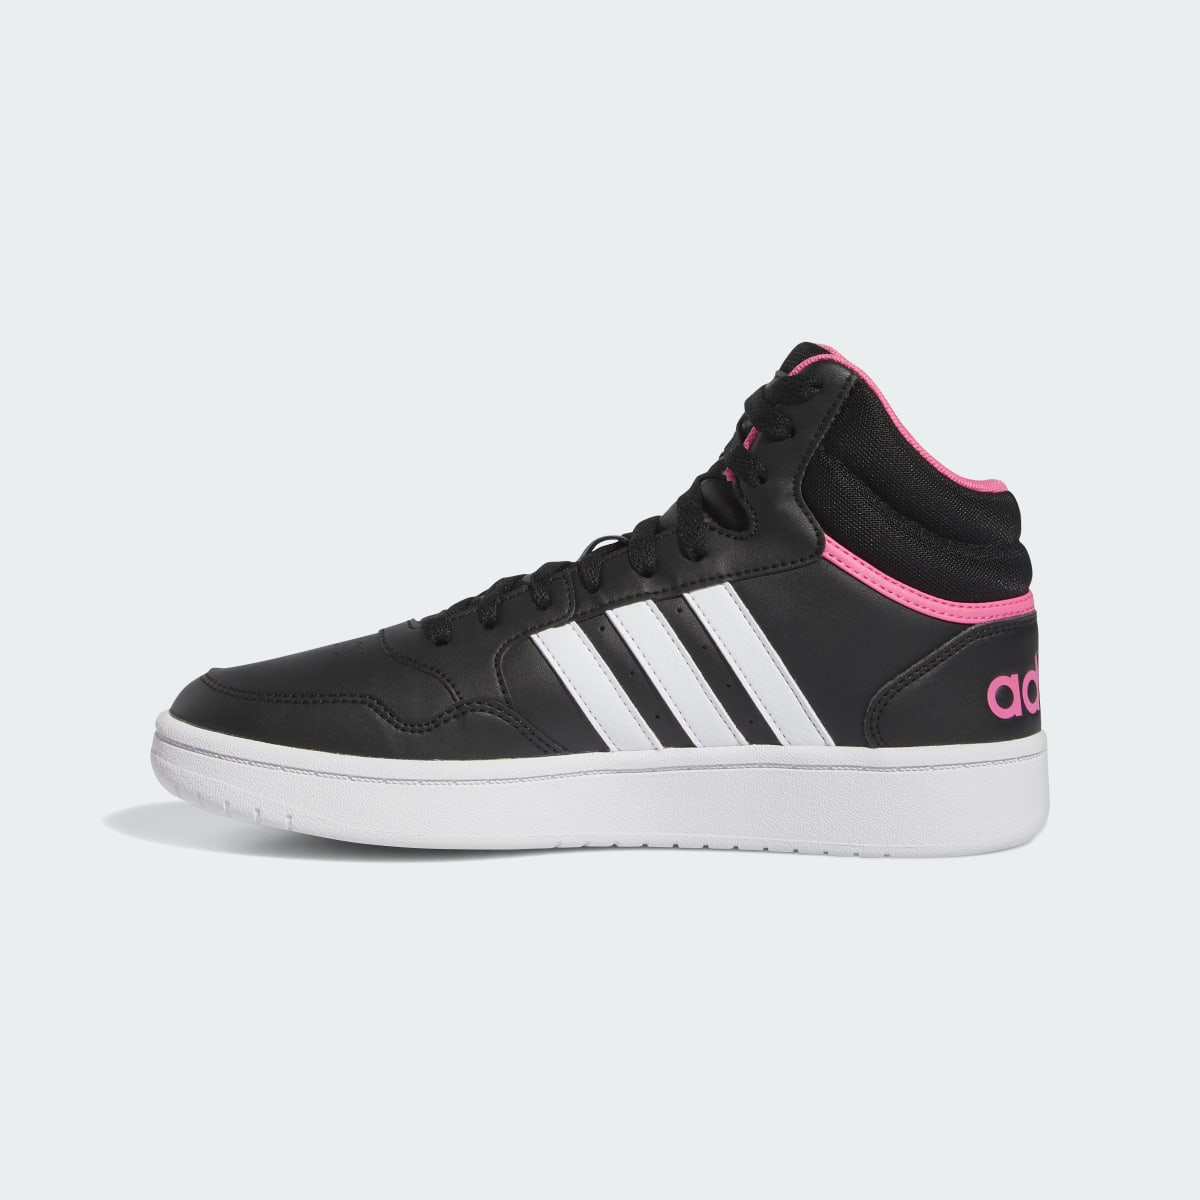 Adidas Hoops 3.0 Mid Shoes. 7